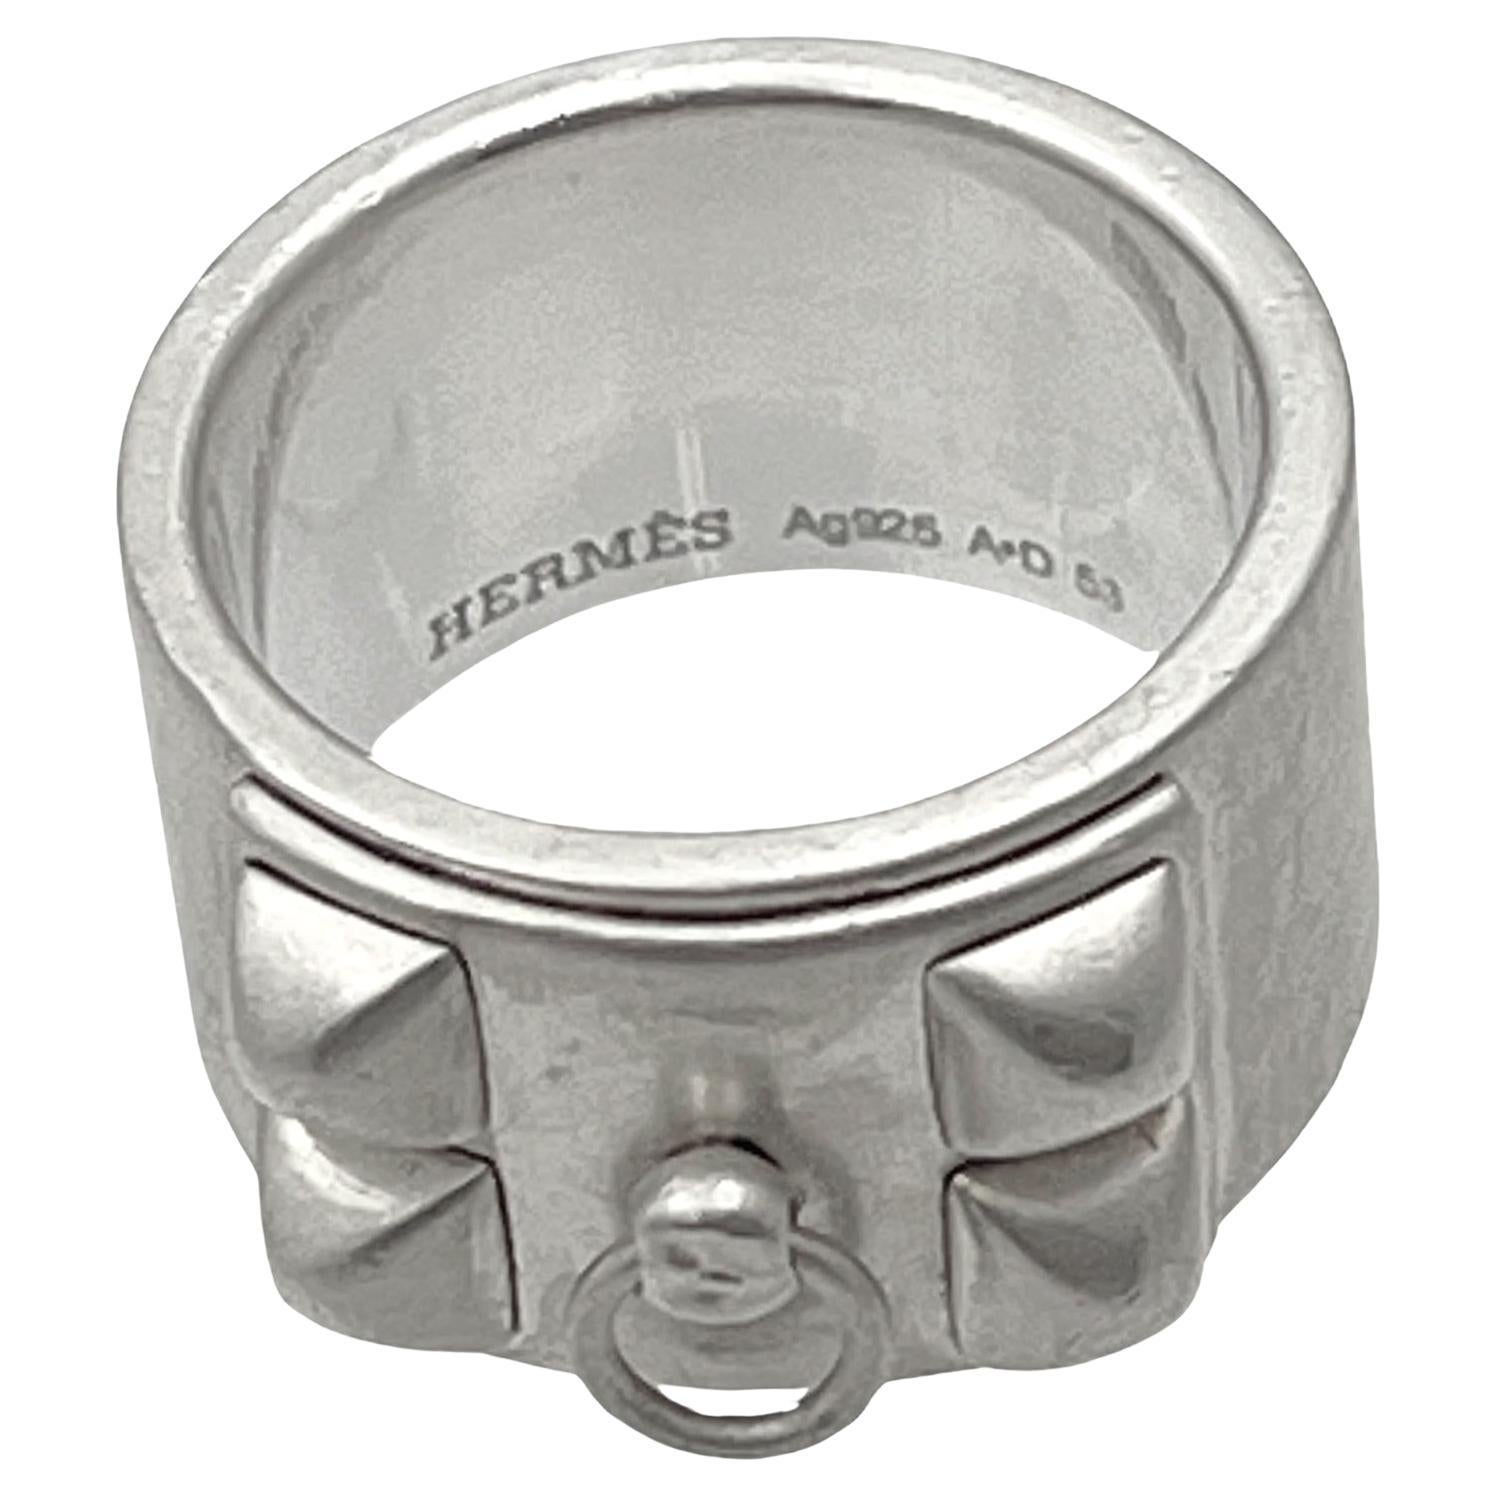 Hermès Collier De Chien Sterling Silver Ring In Excellent Condition For Sale In Palm Beach, FL